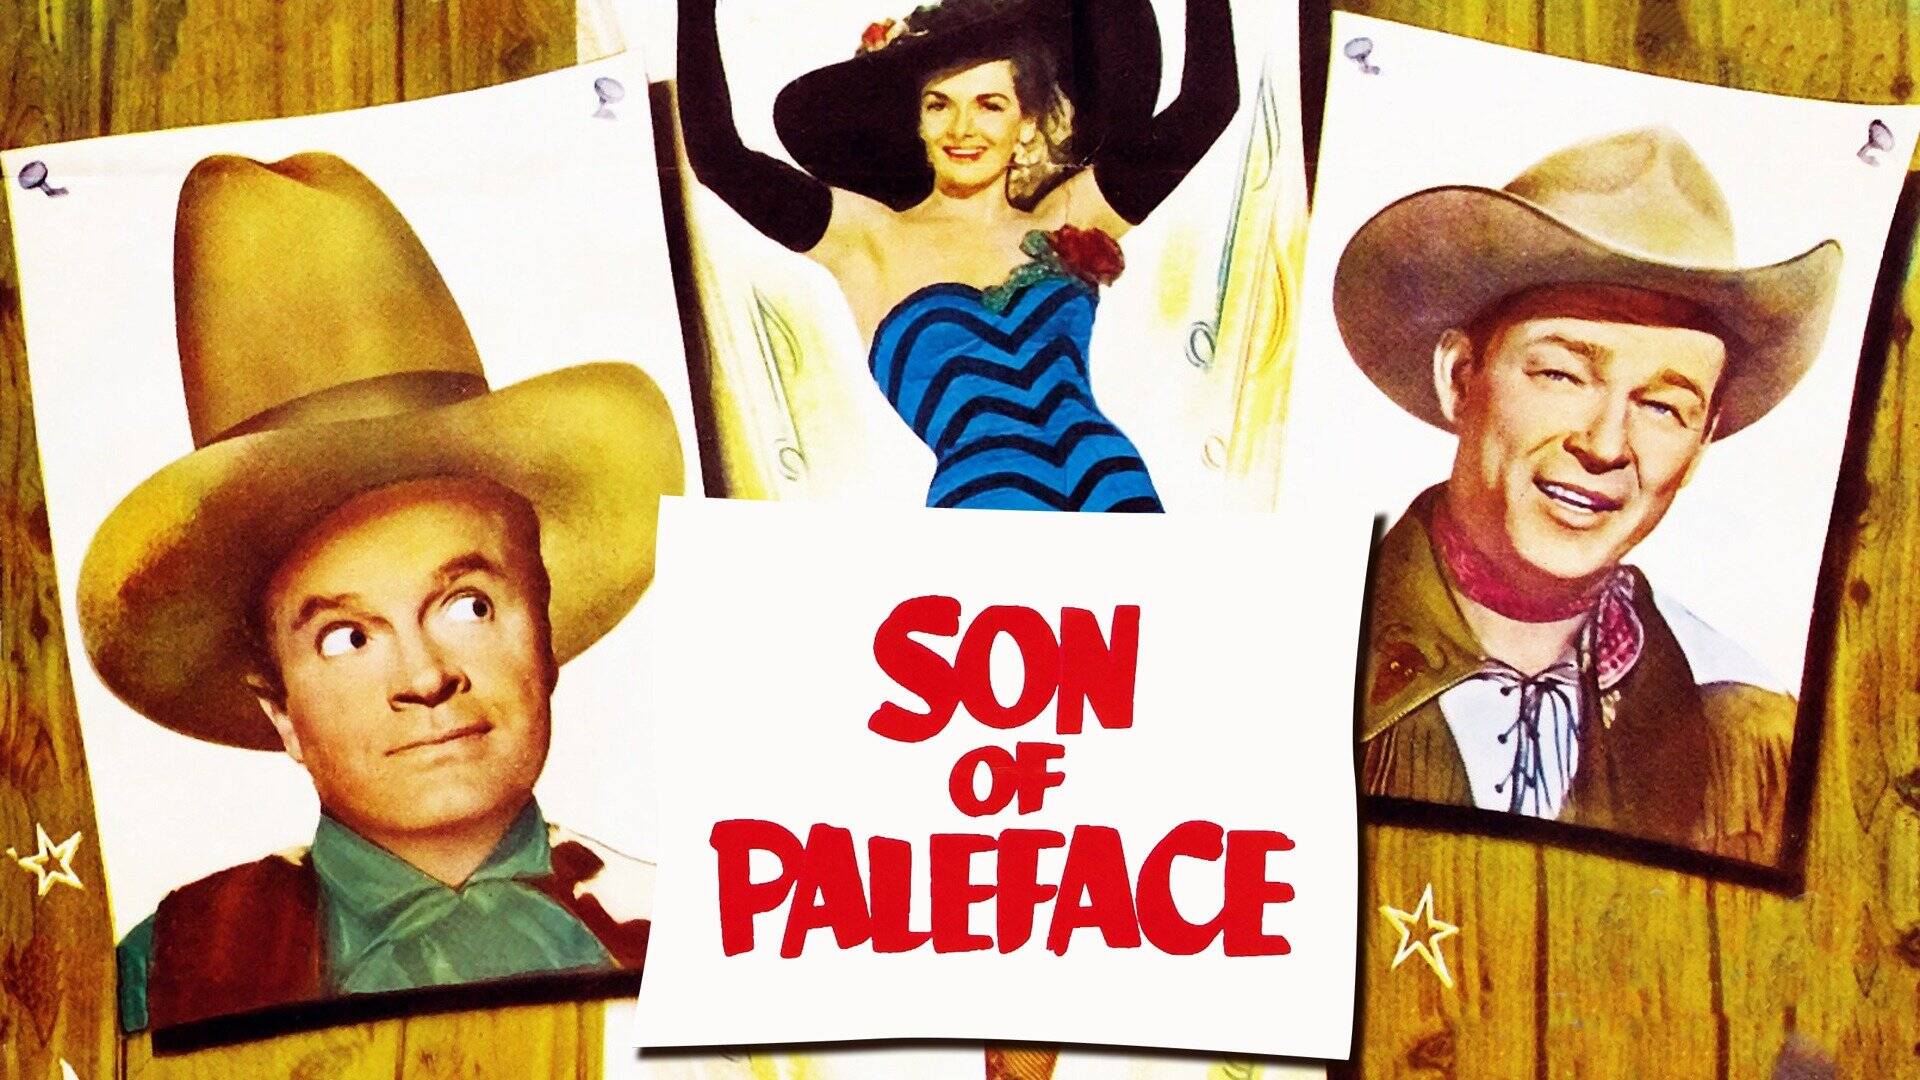 41-facts-about-the-movie-son-of-paleface